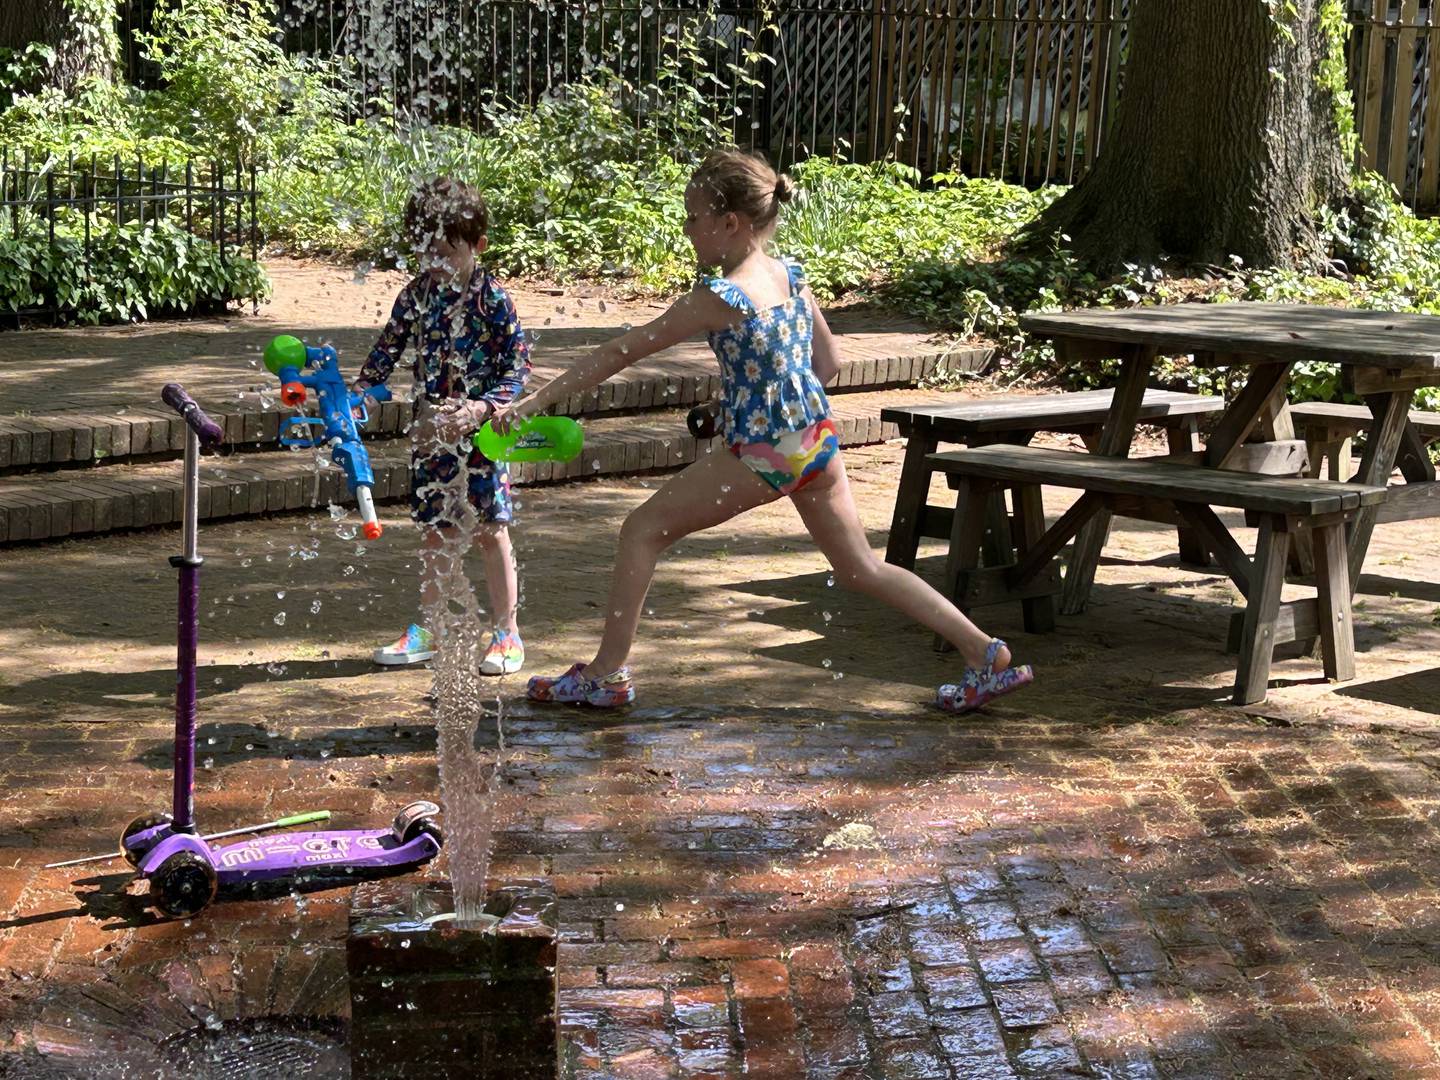 Children play in the splash fountain at Rutter's Mill Park in Bolton Hill Sunday afternoon.